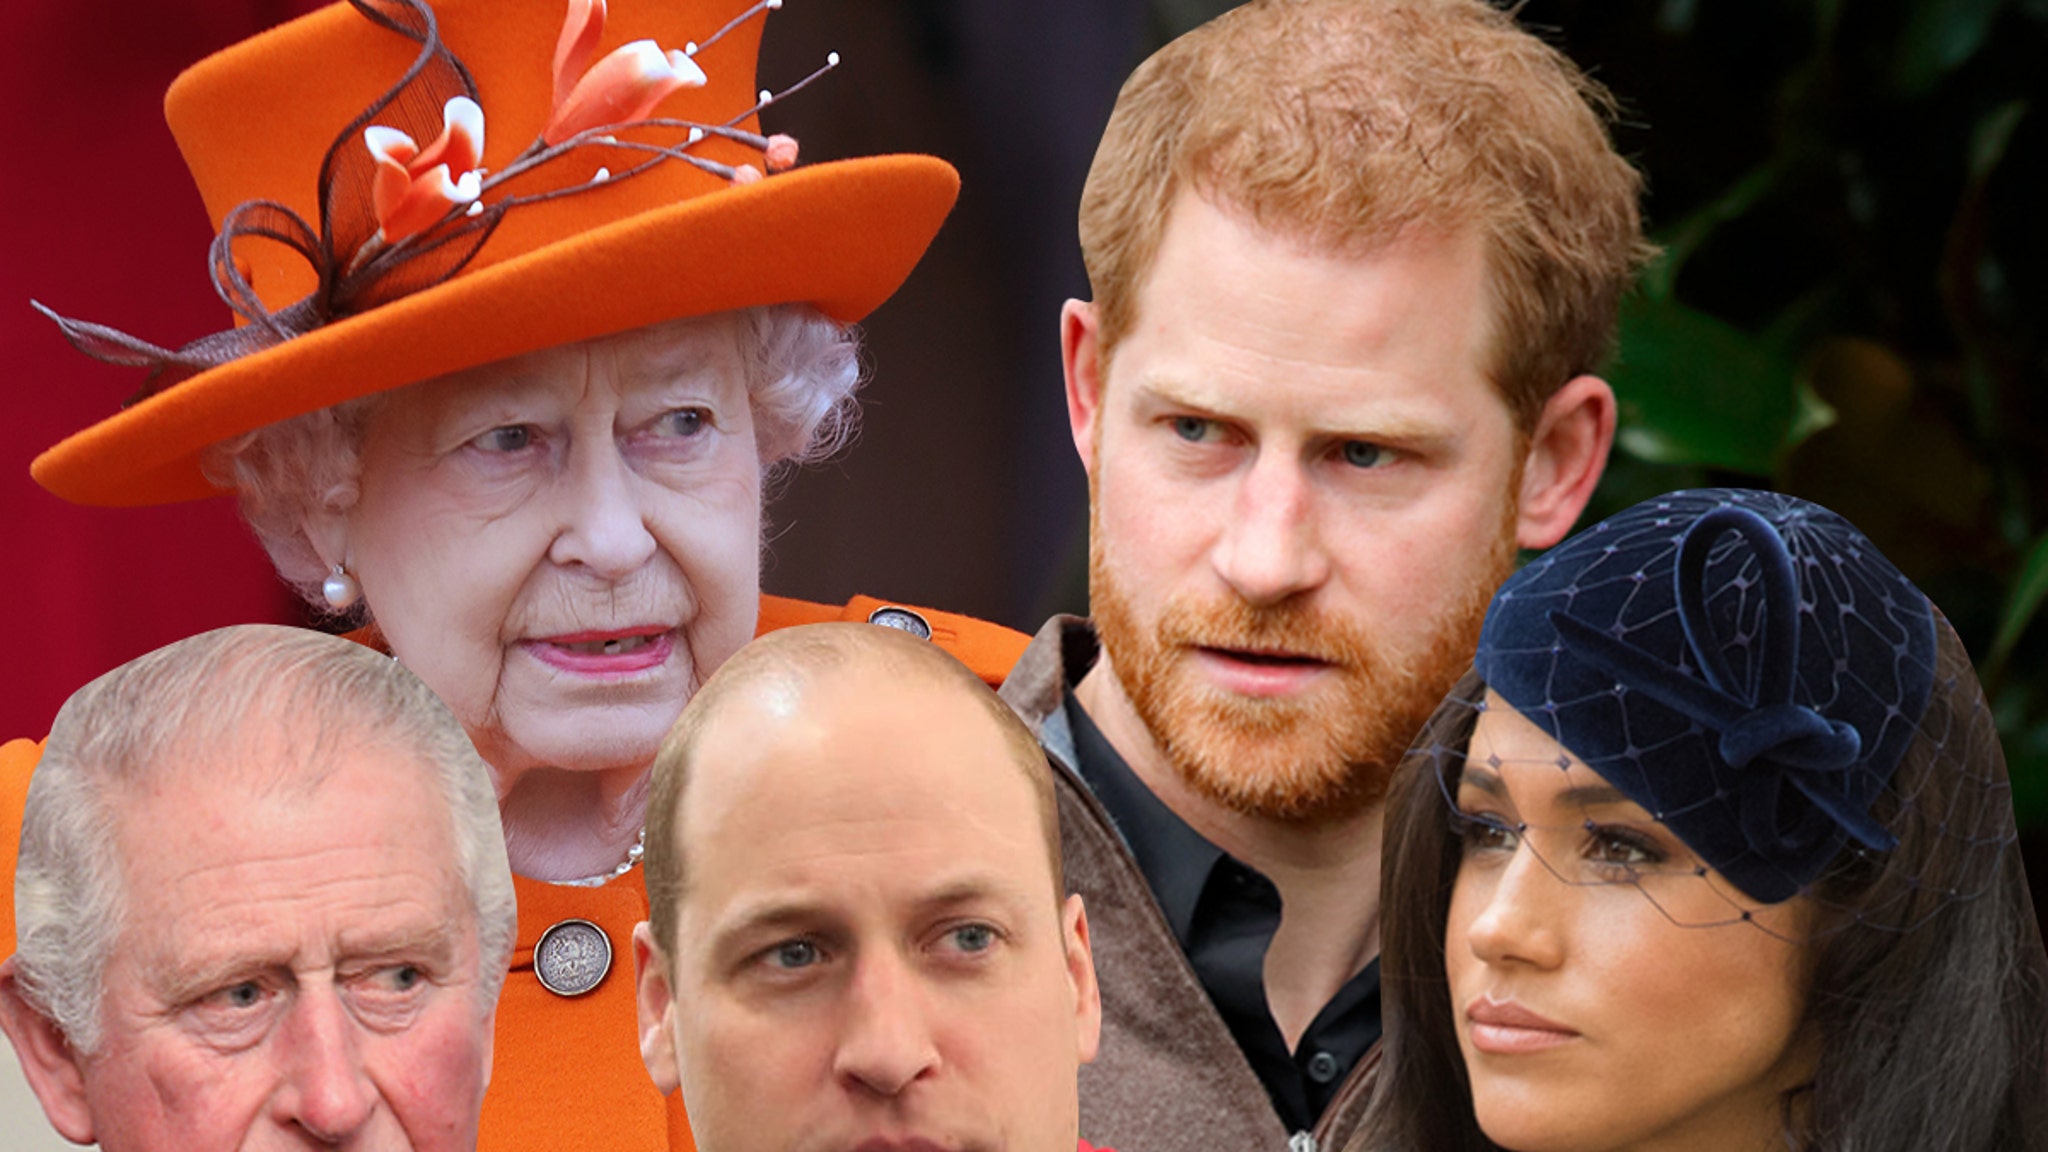 The queen calls Meghan Markle and Prince Harry’s allegations of racism as “concerning”